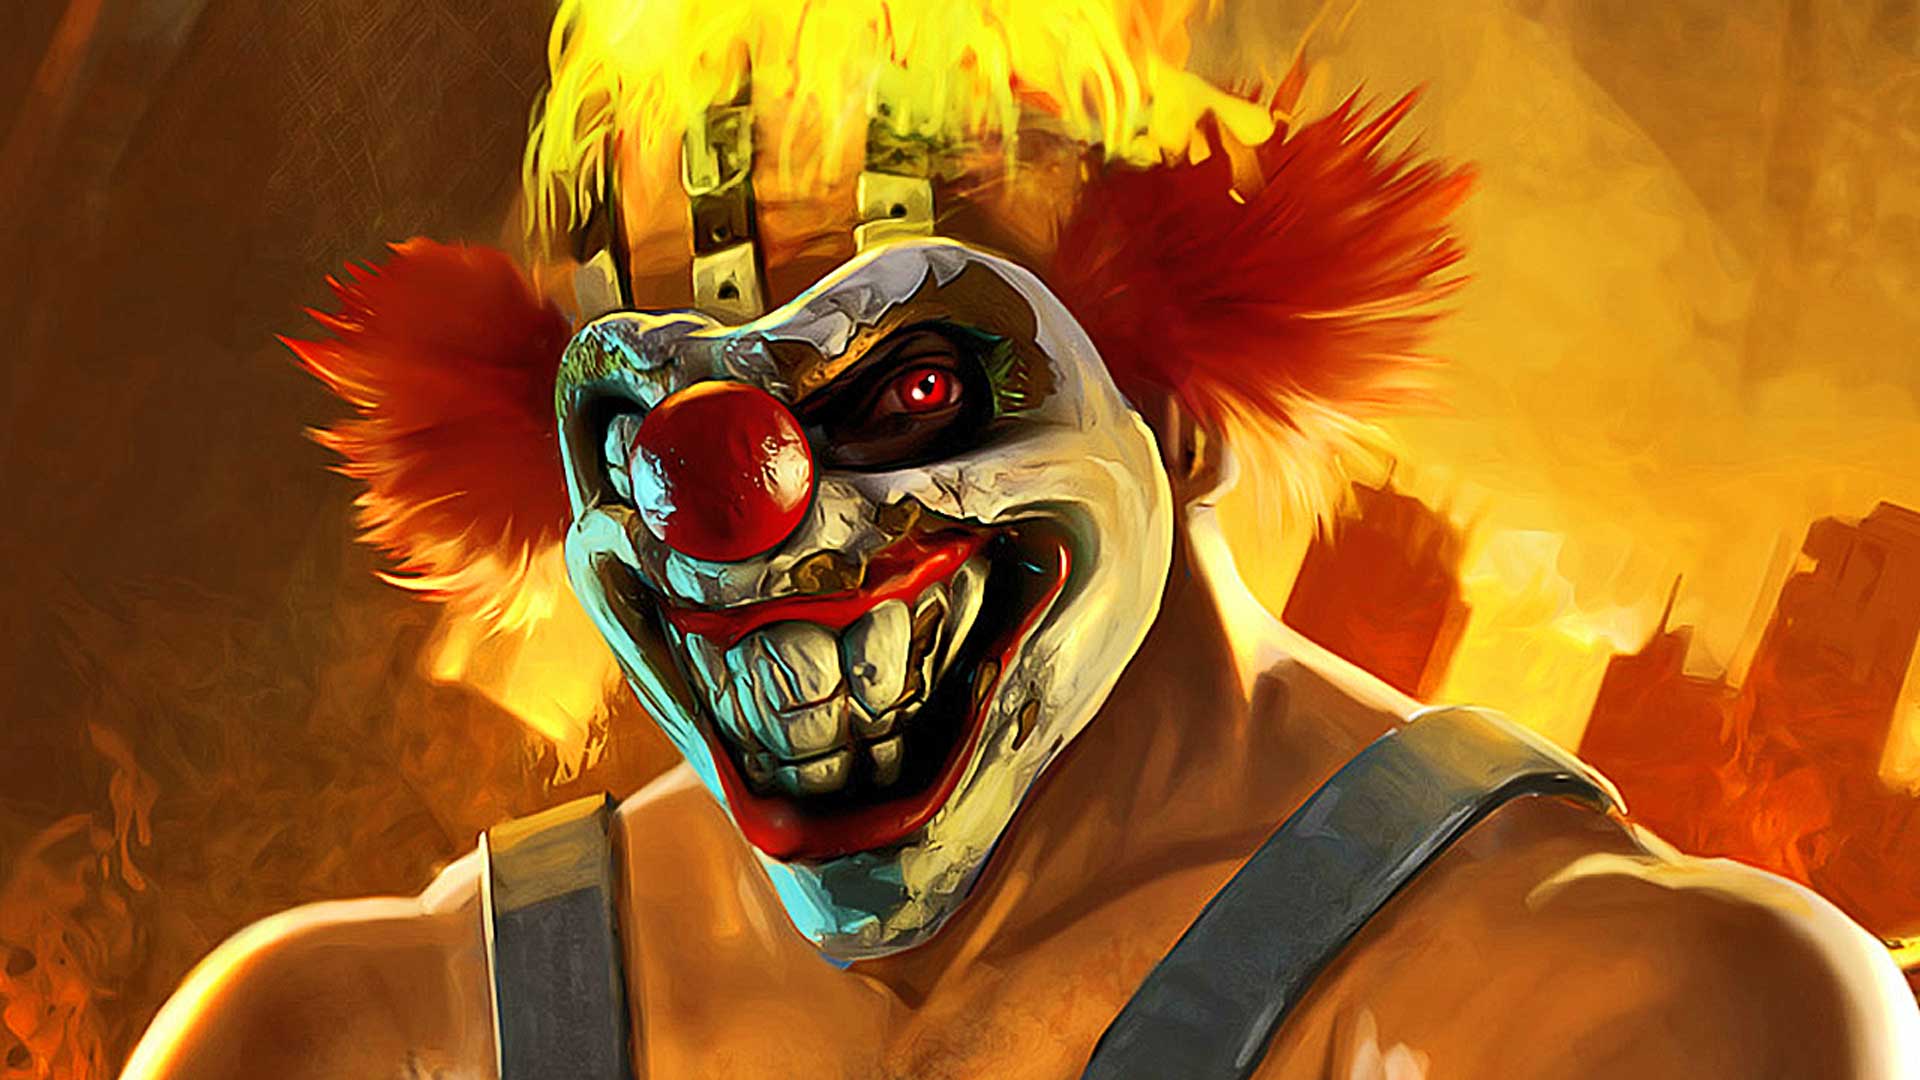 Twisted Metal Series From Deadpool Writers in The Works at PlayStation Productions